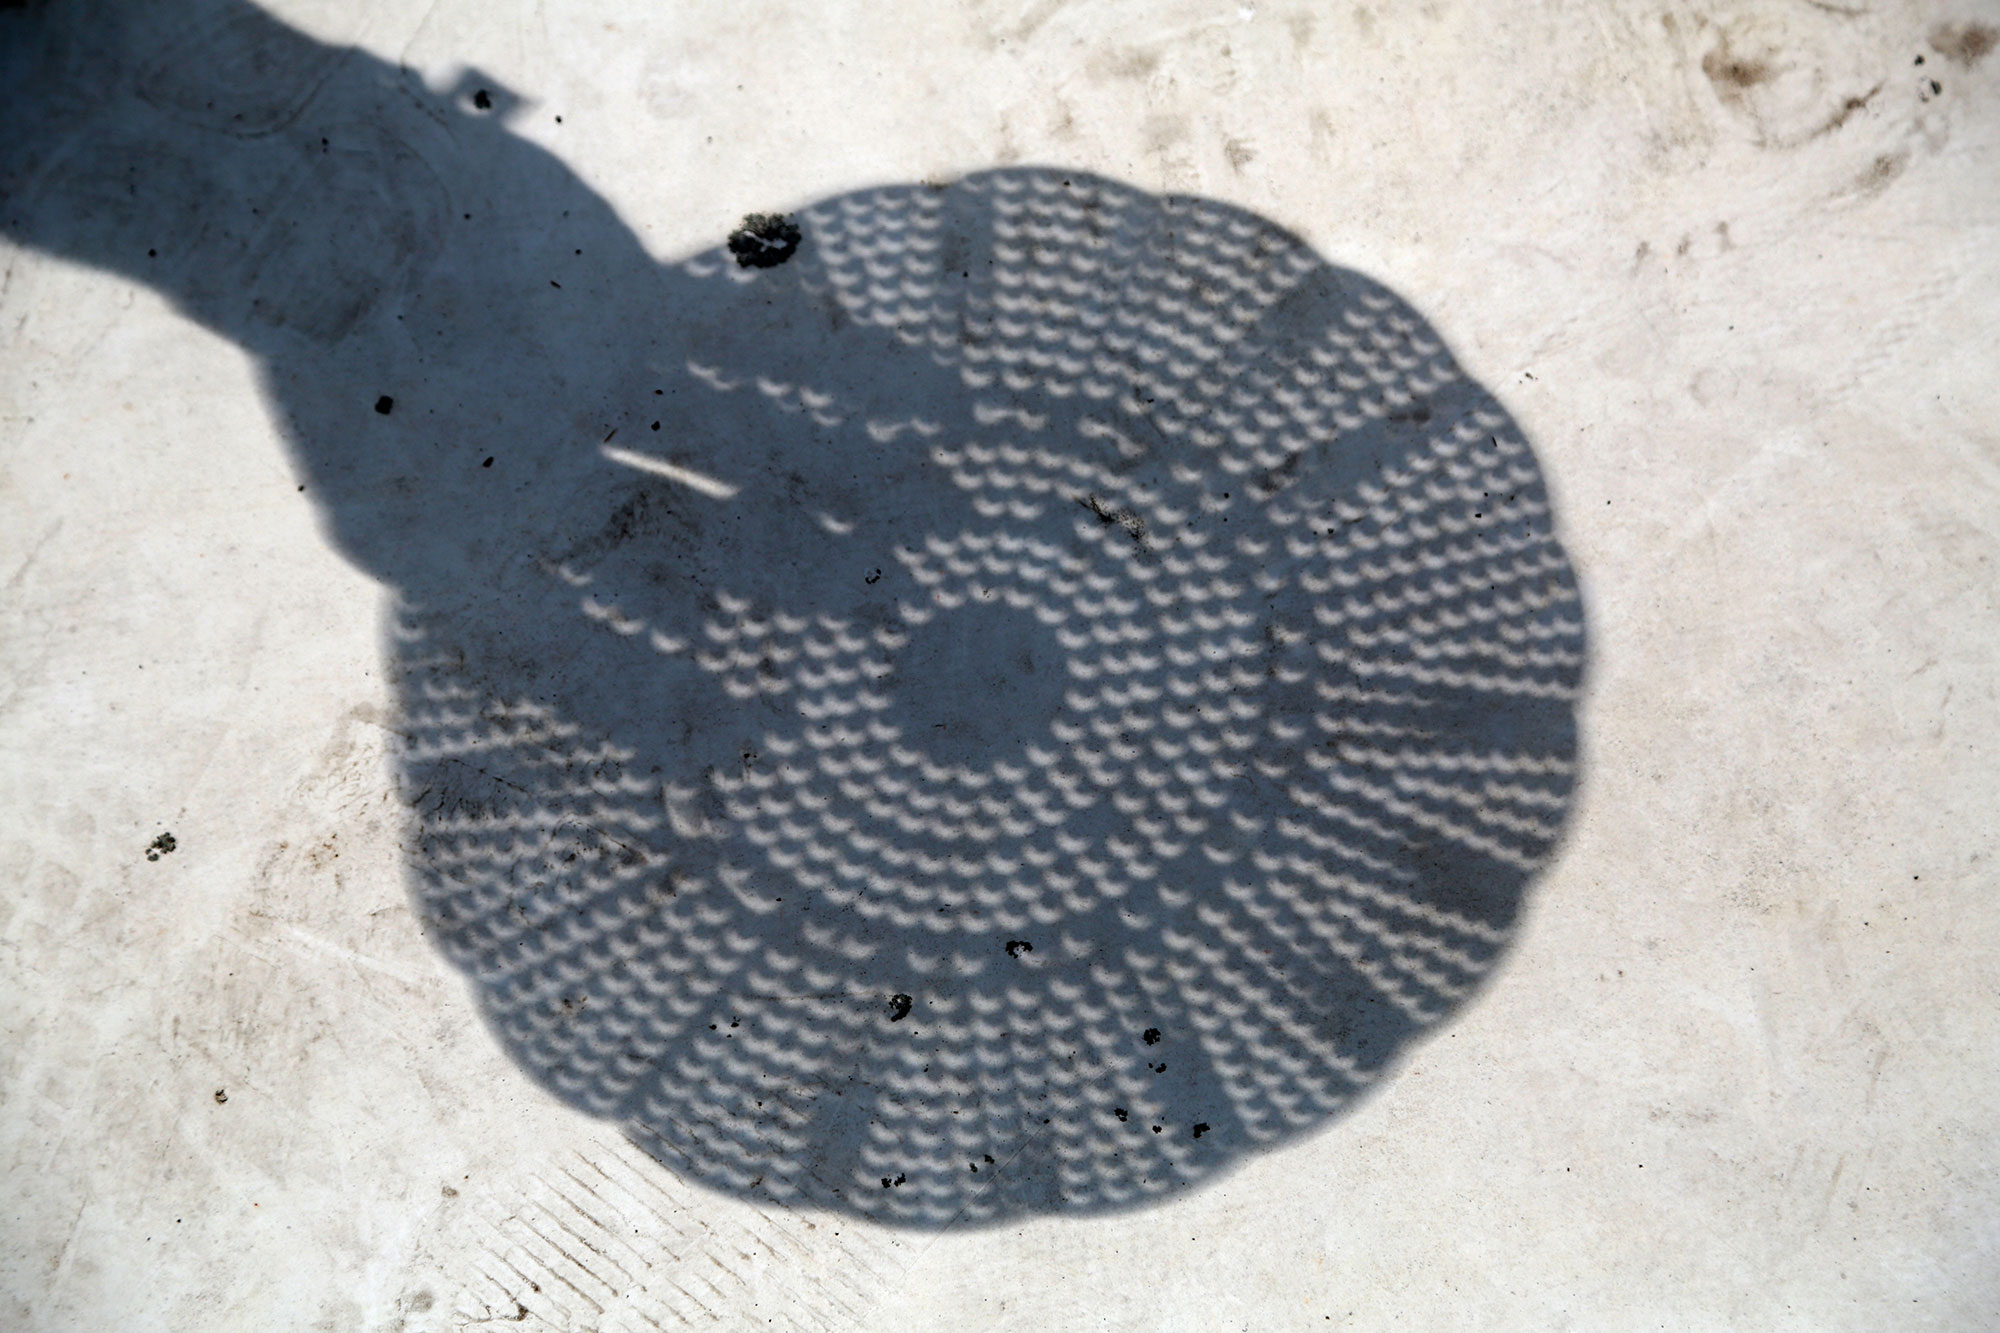 The shadow of of a colander and a hand holding it, with the circular hole creating crescents on the ground during an eclipse.